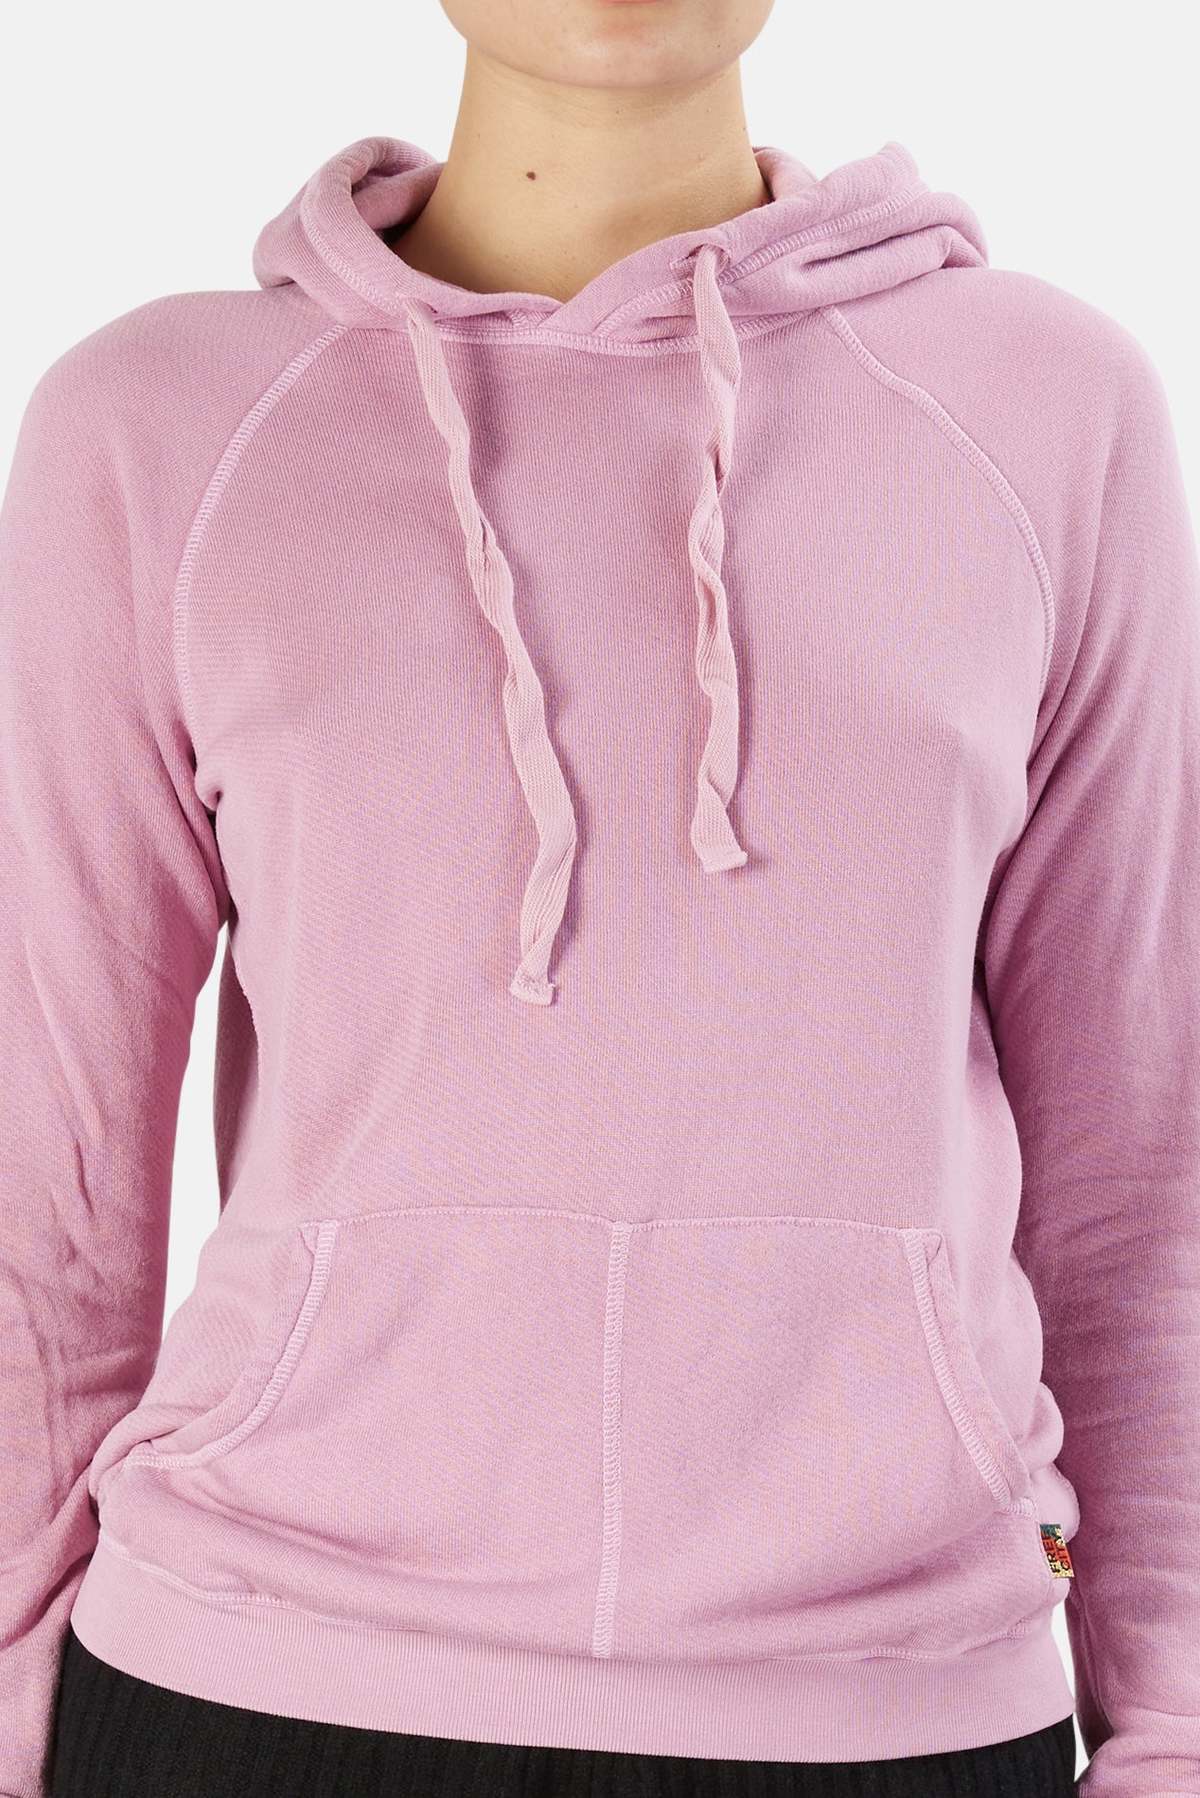 FREECITY Superfluff Lux Pullover Hoodie in Petal